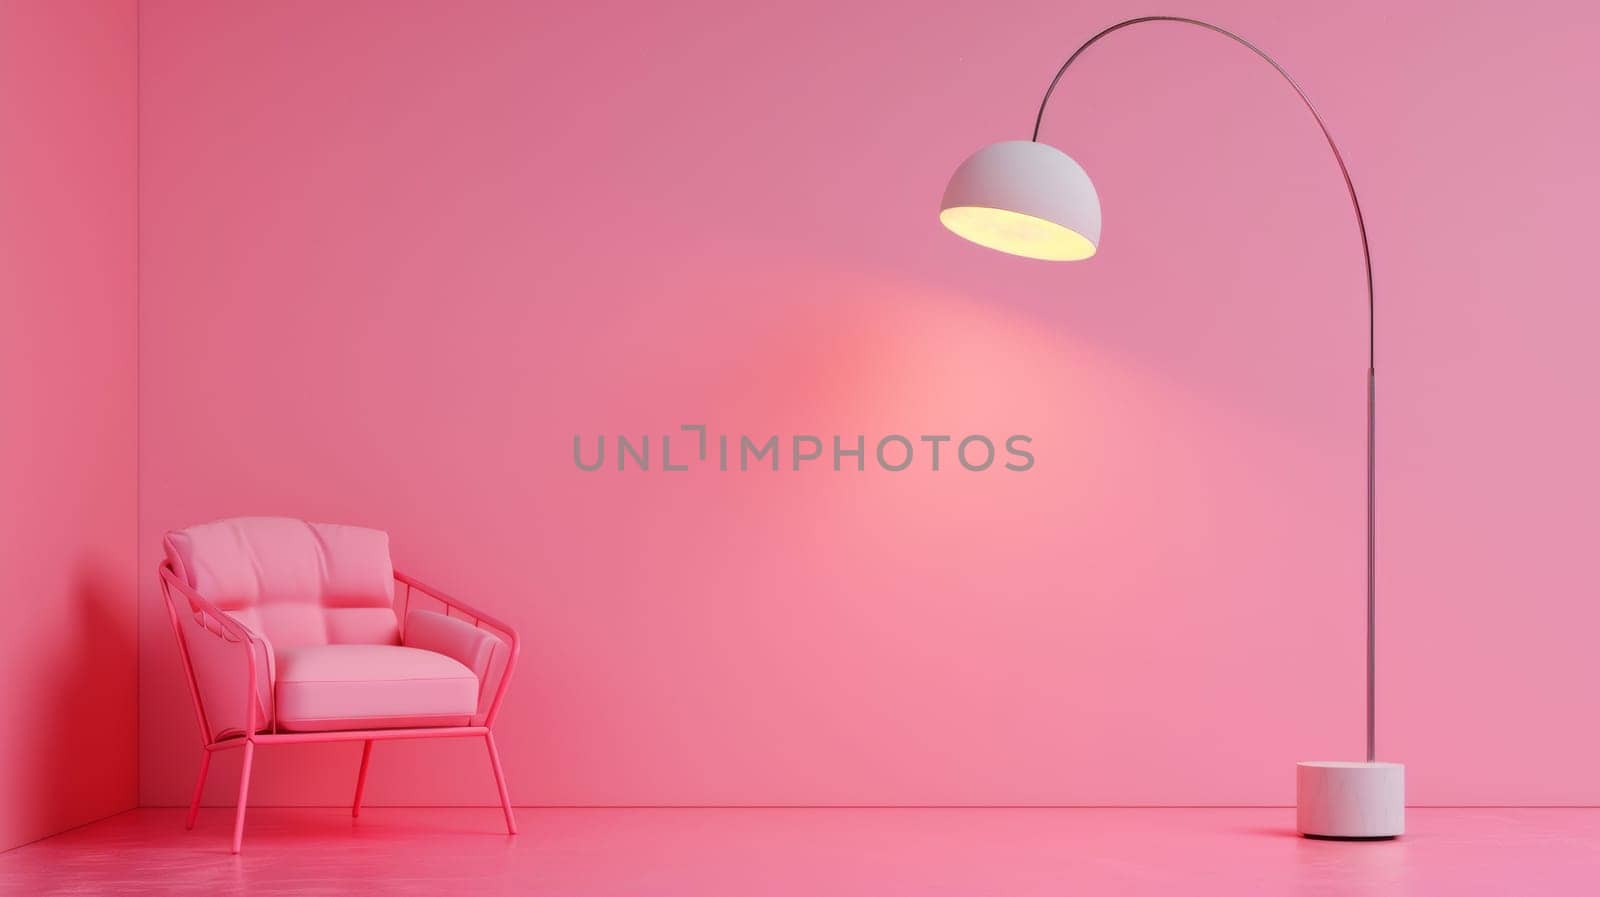 A pink room with a lamp and chair in front of it